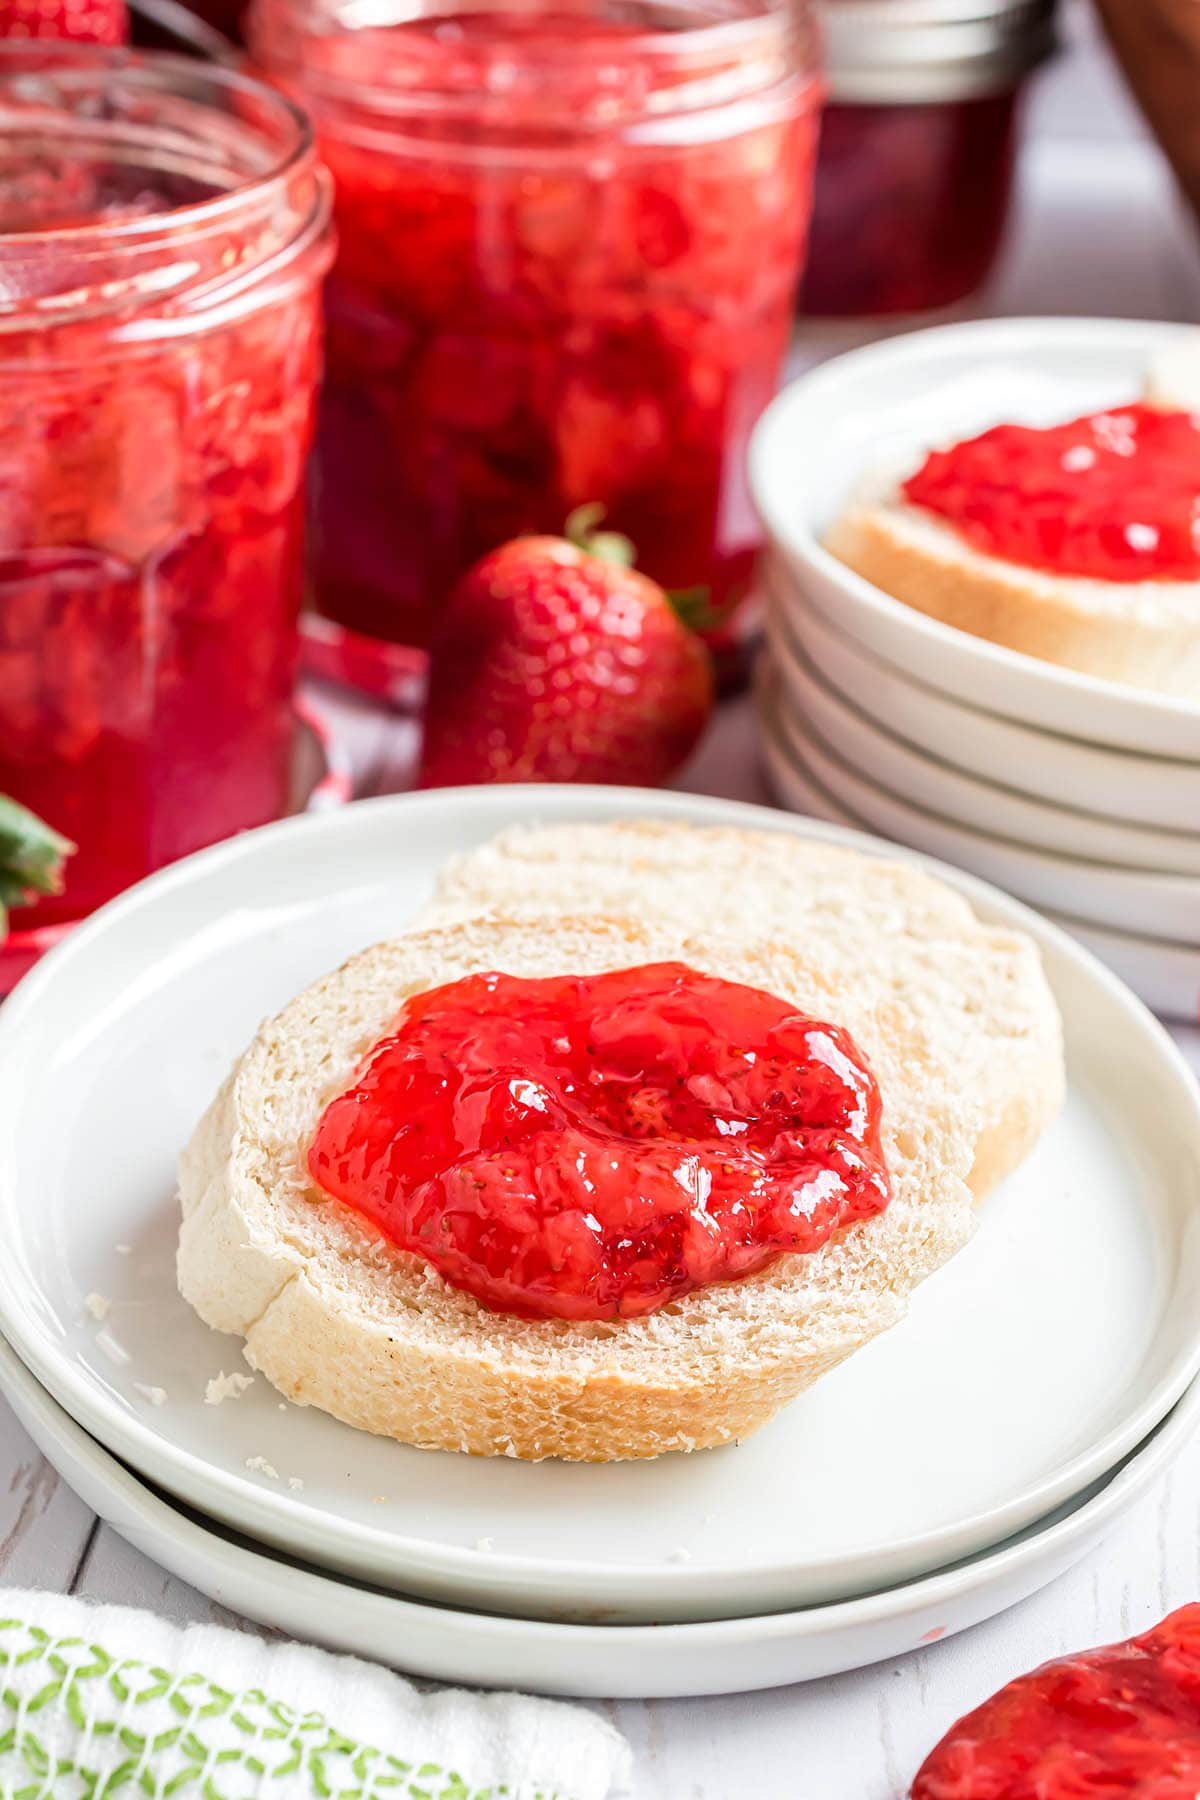 Strawberry jam on a slice of bread